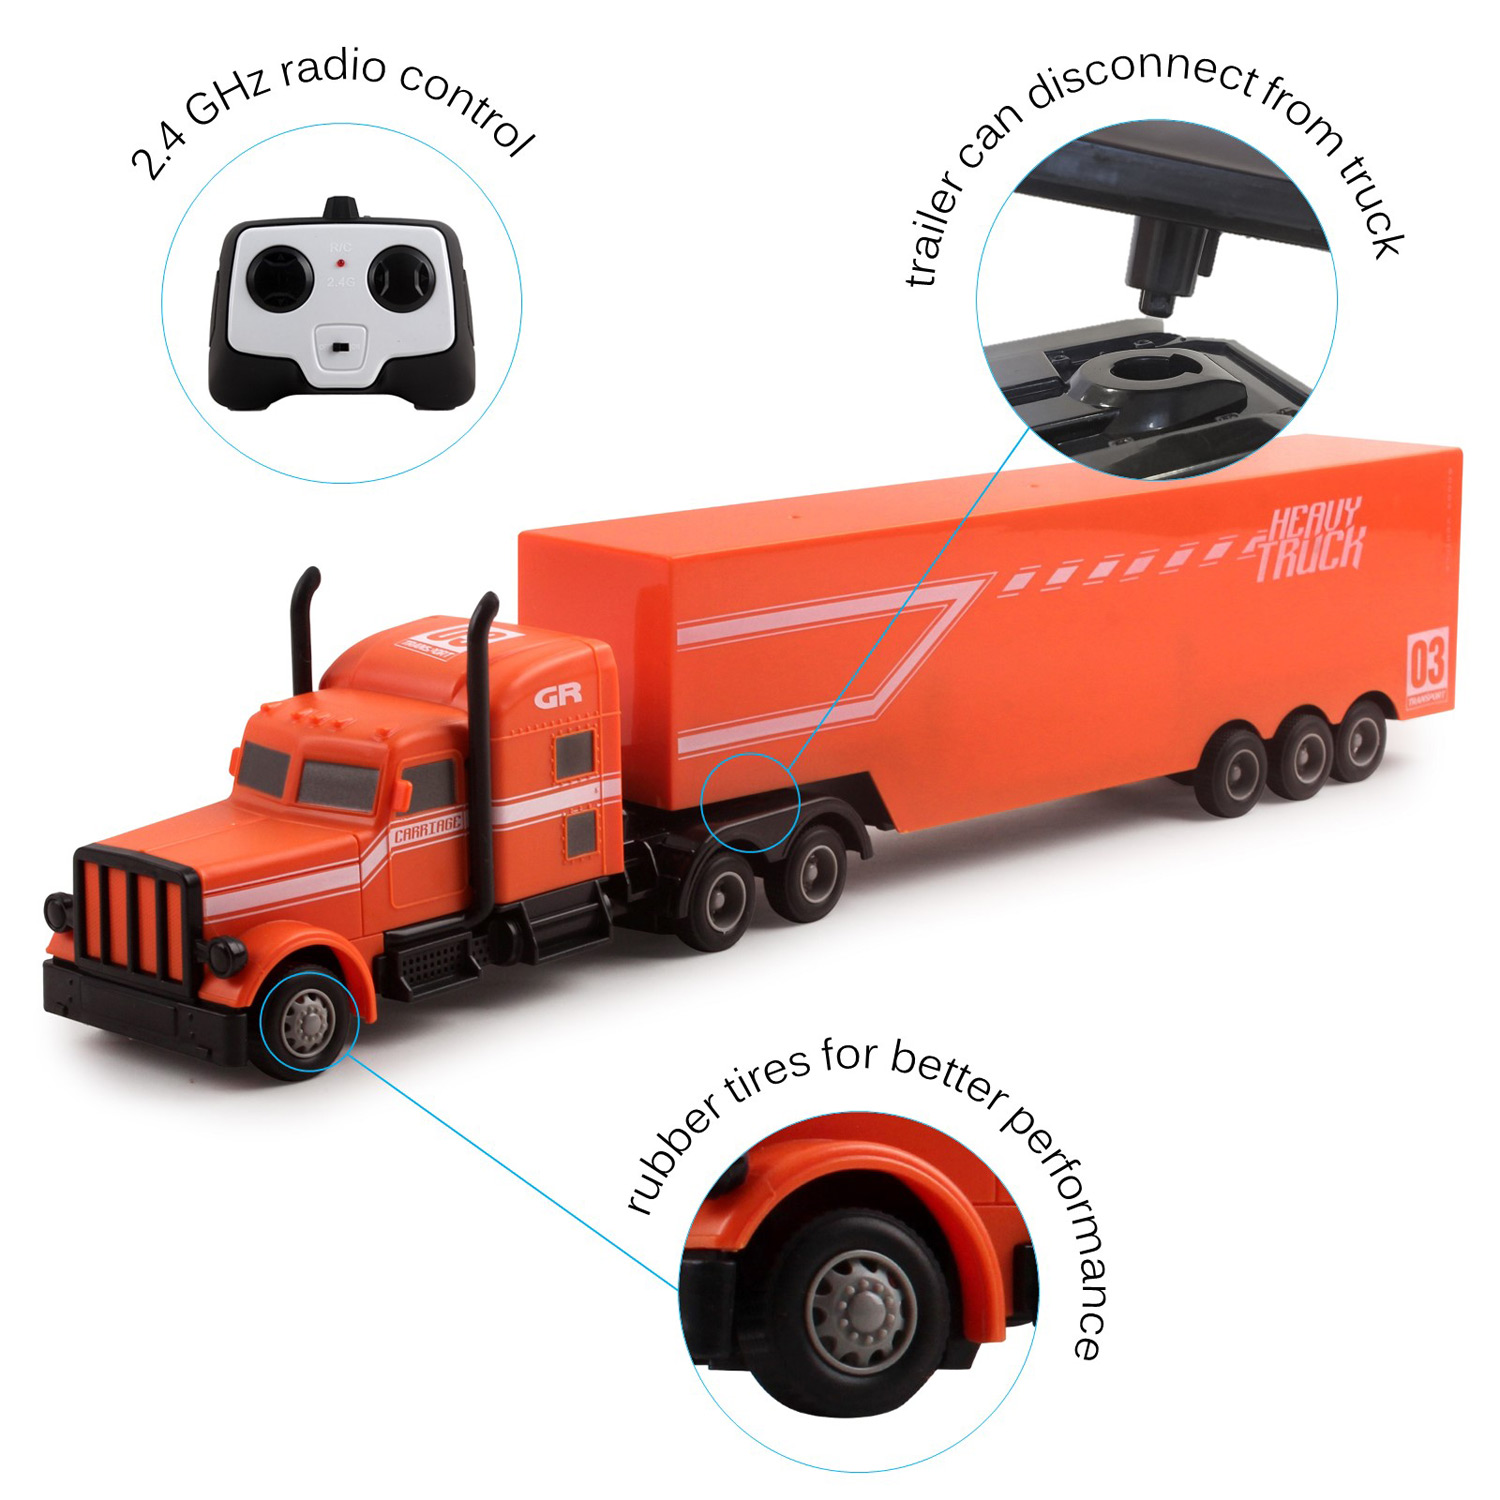 Large RC Semi Truck Trailer 18 24Ghz Fast Speed 116 Scale Electric Hauler Rechargeable Remote Control Kids Big Rig Toy Carrier Van Transporter Vehicle Full Cargo Perfect Gift For Children